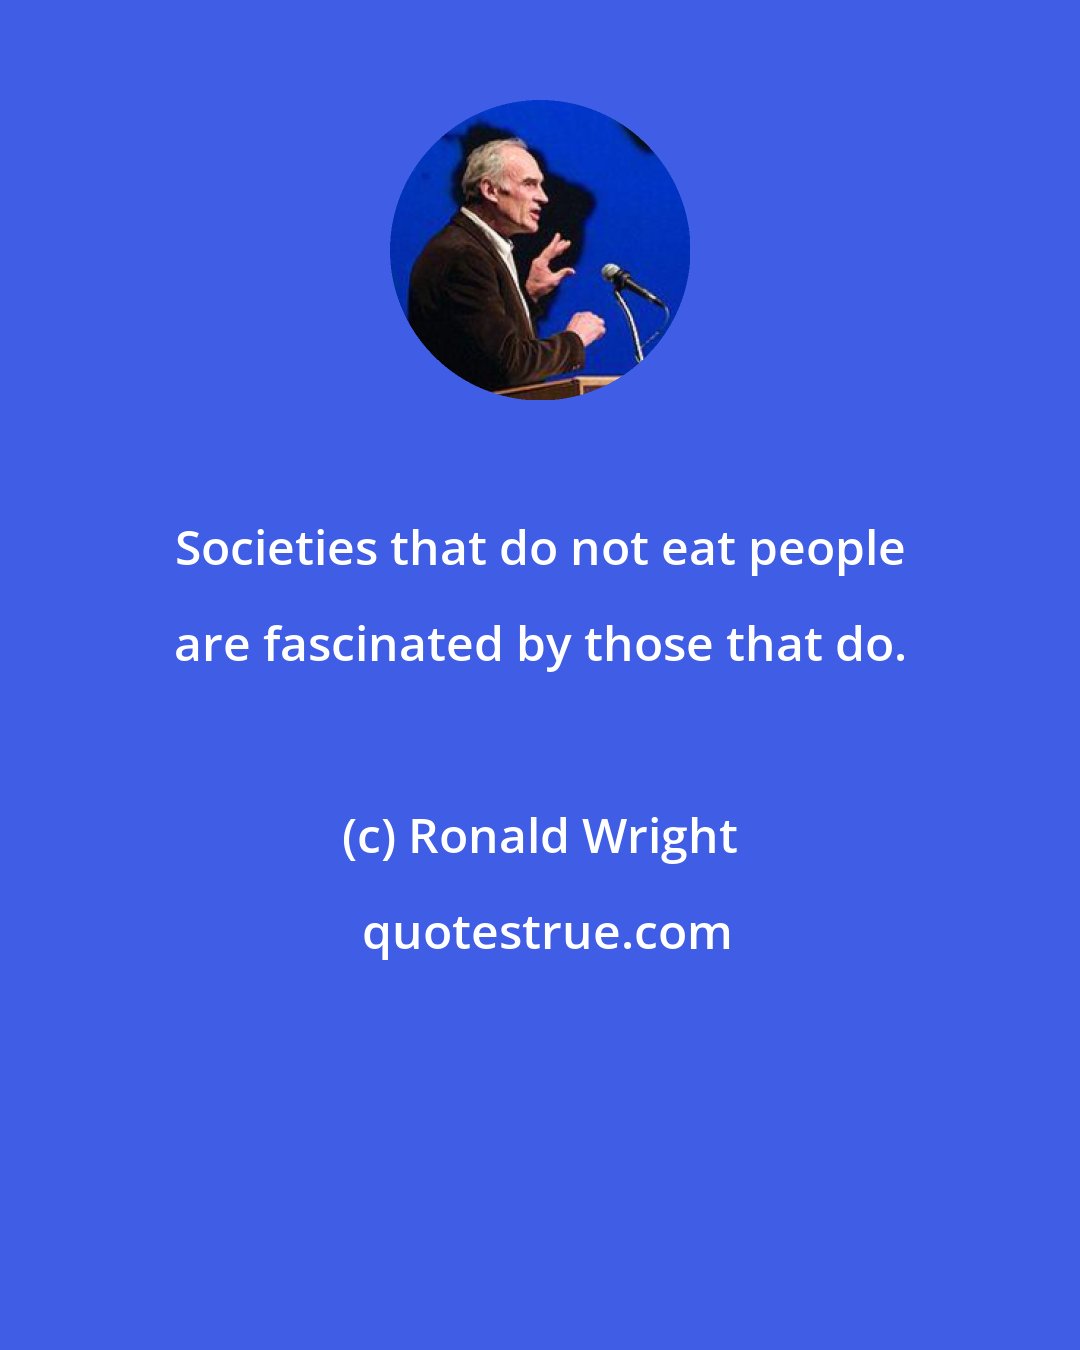 Ronald Wright: Societies that do not eat people are fascinated by those that do.